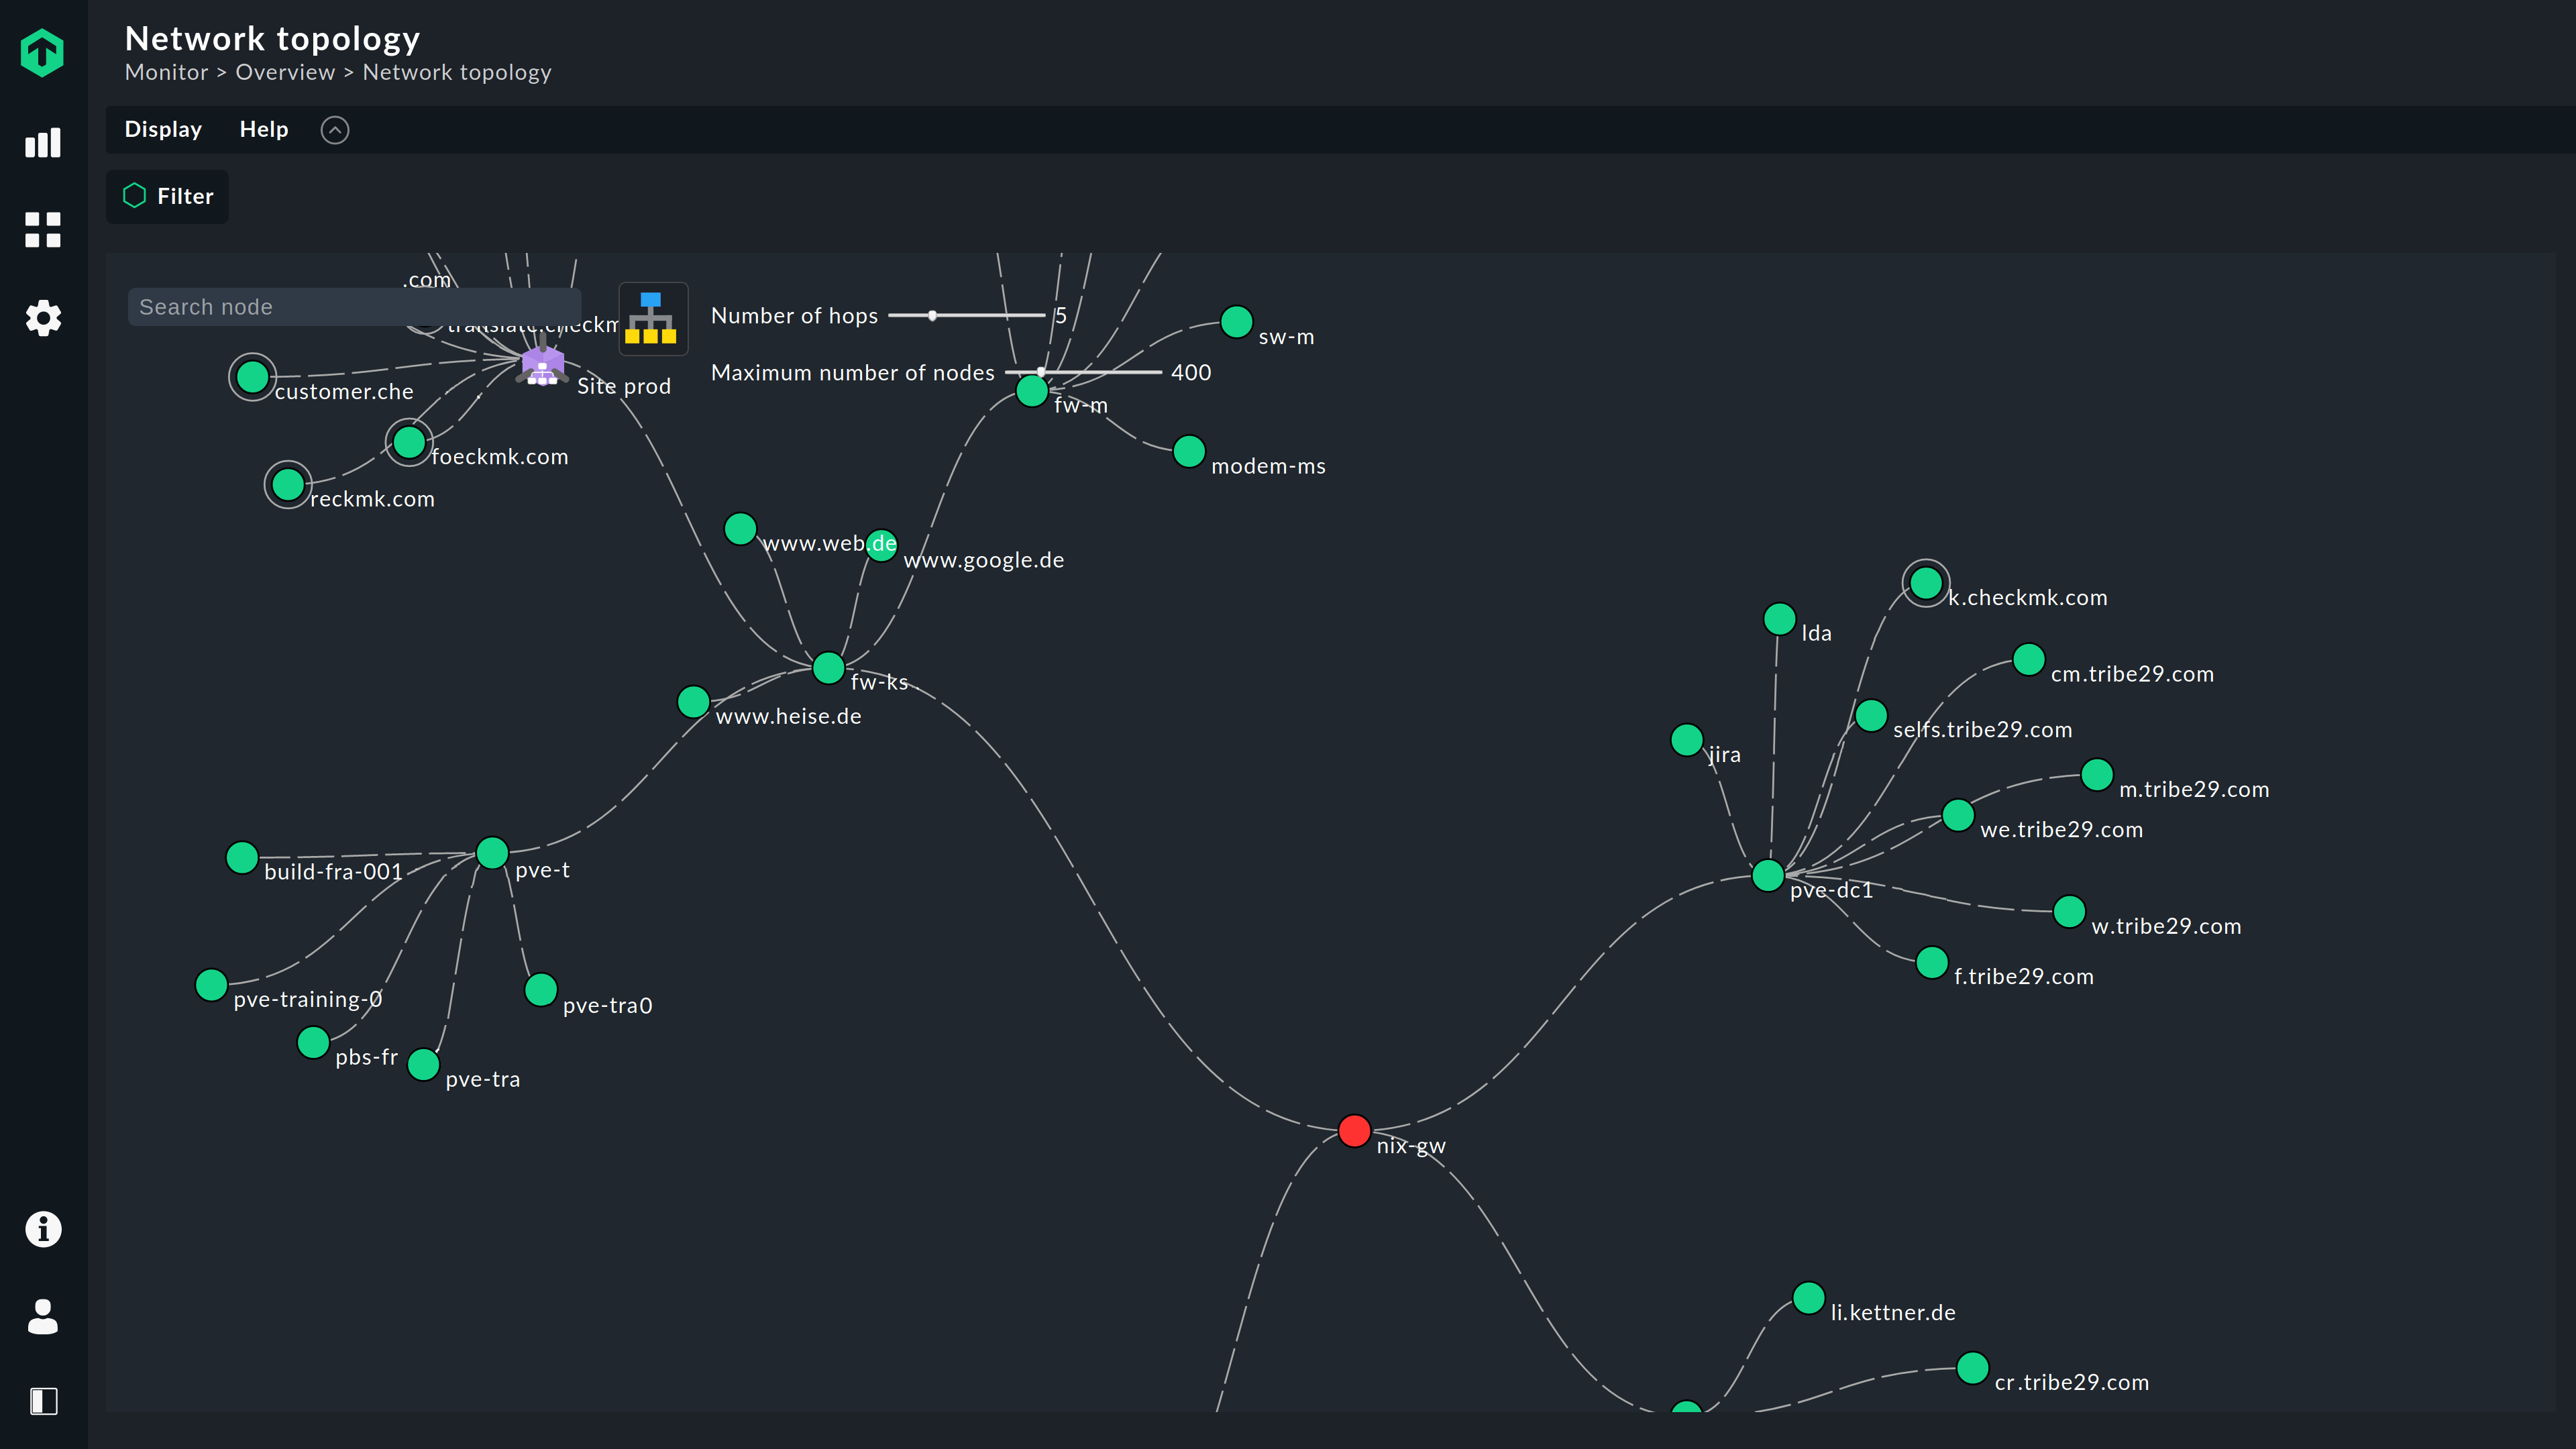 Checkmk provides you a topology of your network in its network monitoring